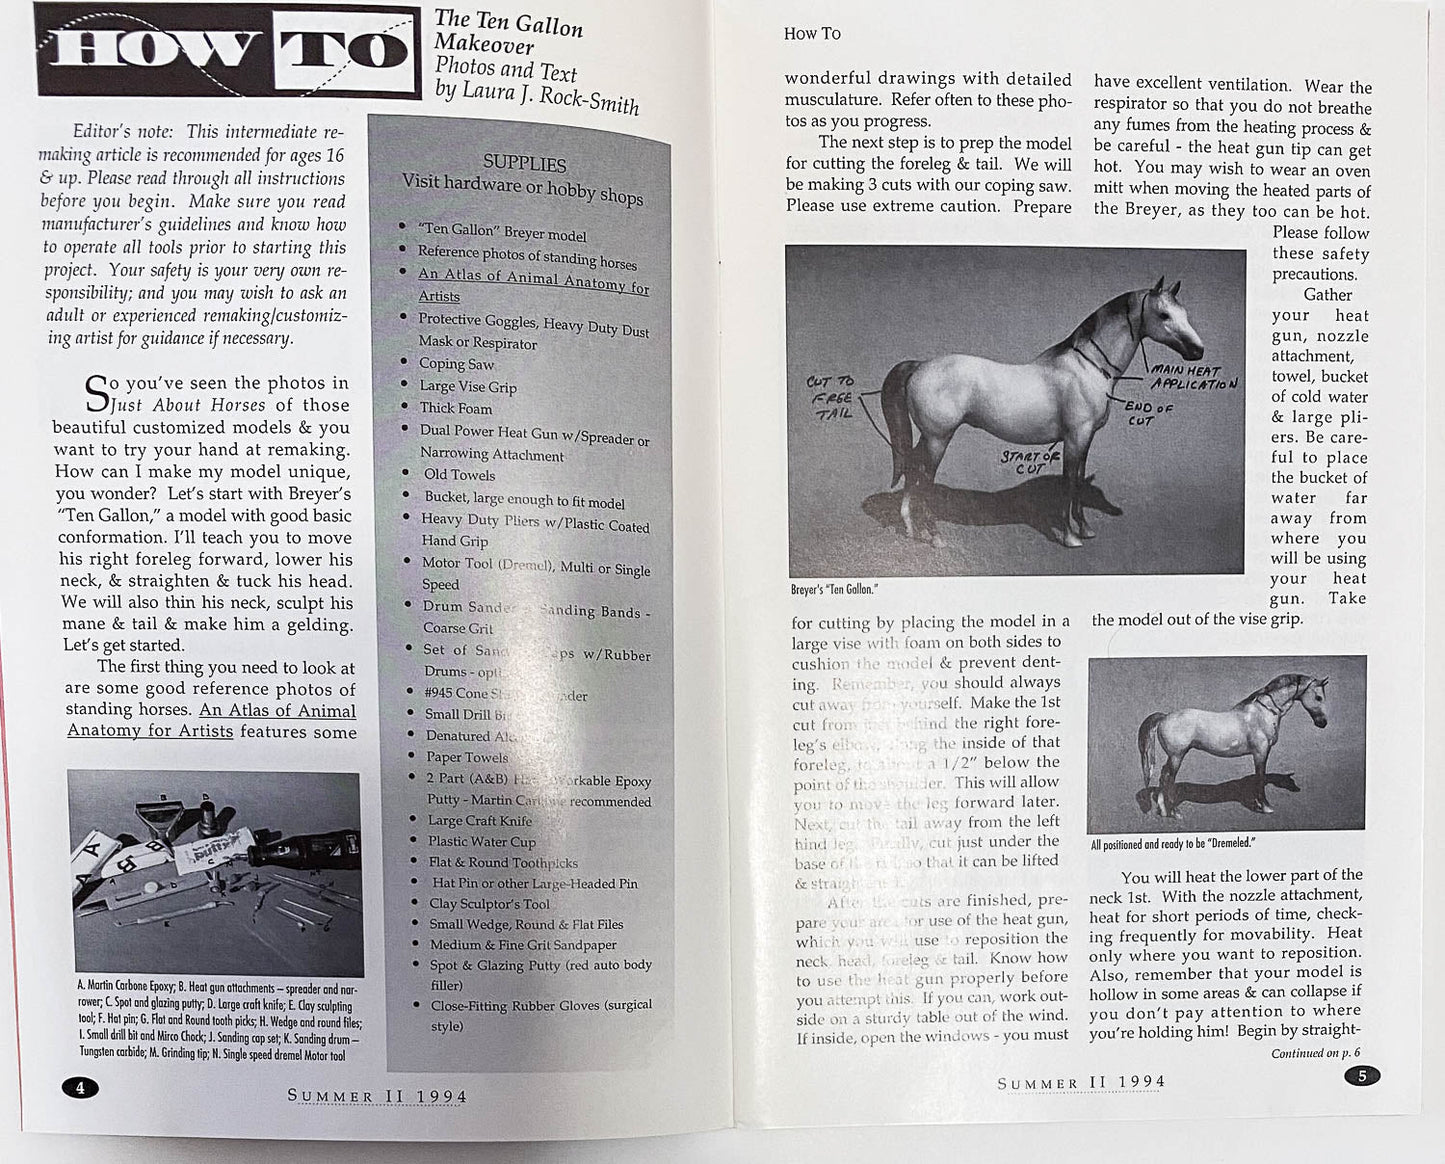 Just About Horses Magazine Vol. 21 No. 3, 1994 Summer 2